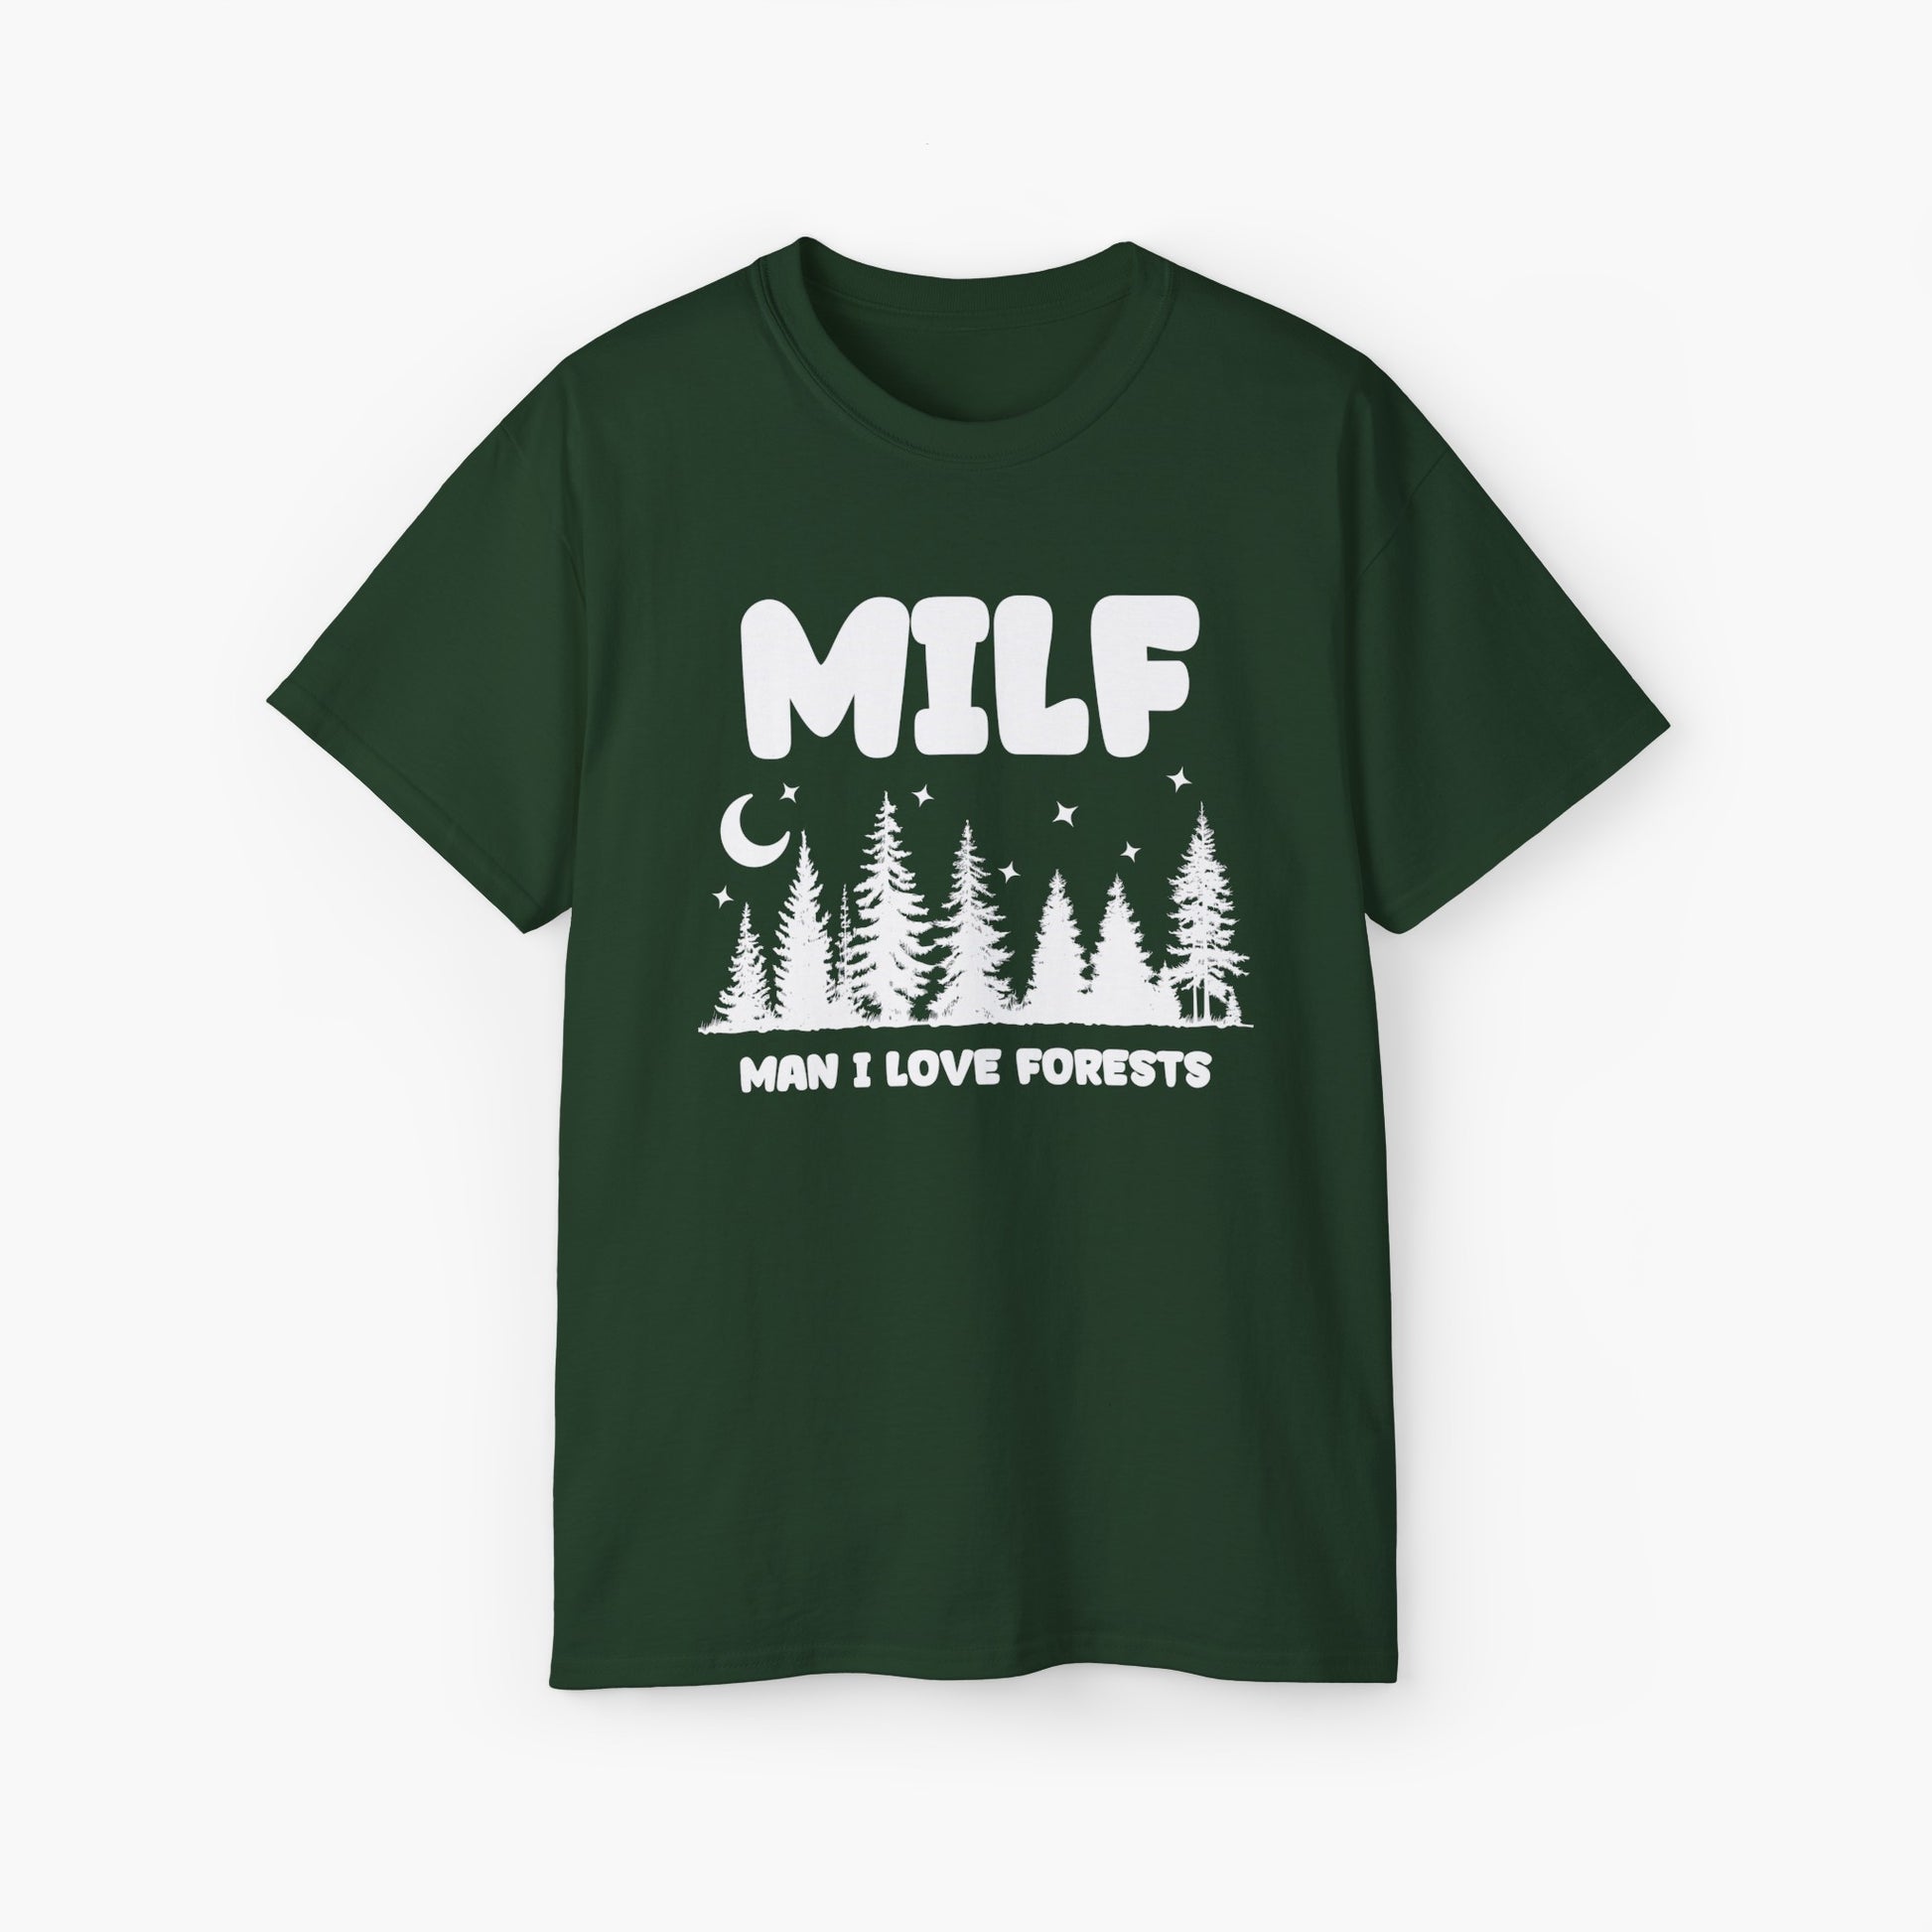 Green t-shirt with the text 'MILF, Man I Love Forests,' featuring trees, stars, and a moon on a plain background.